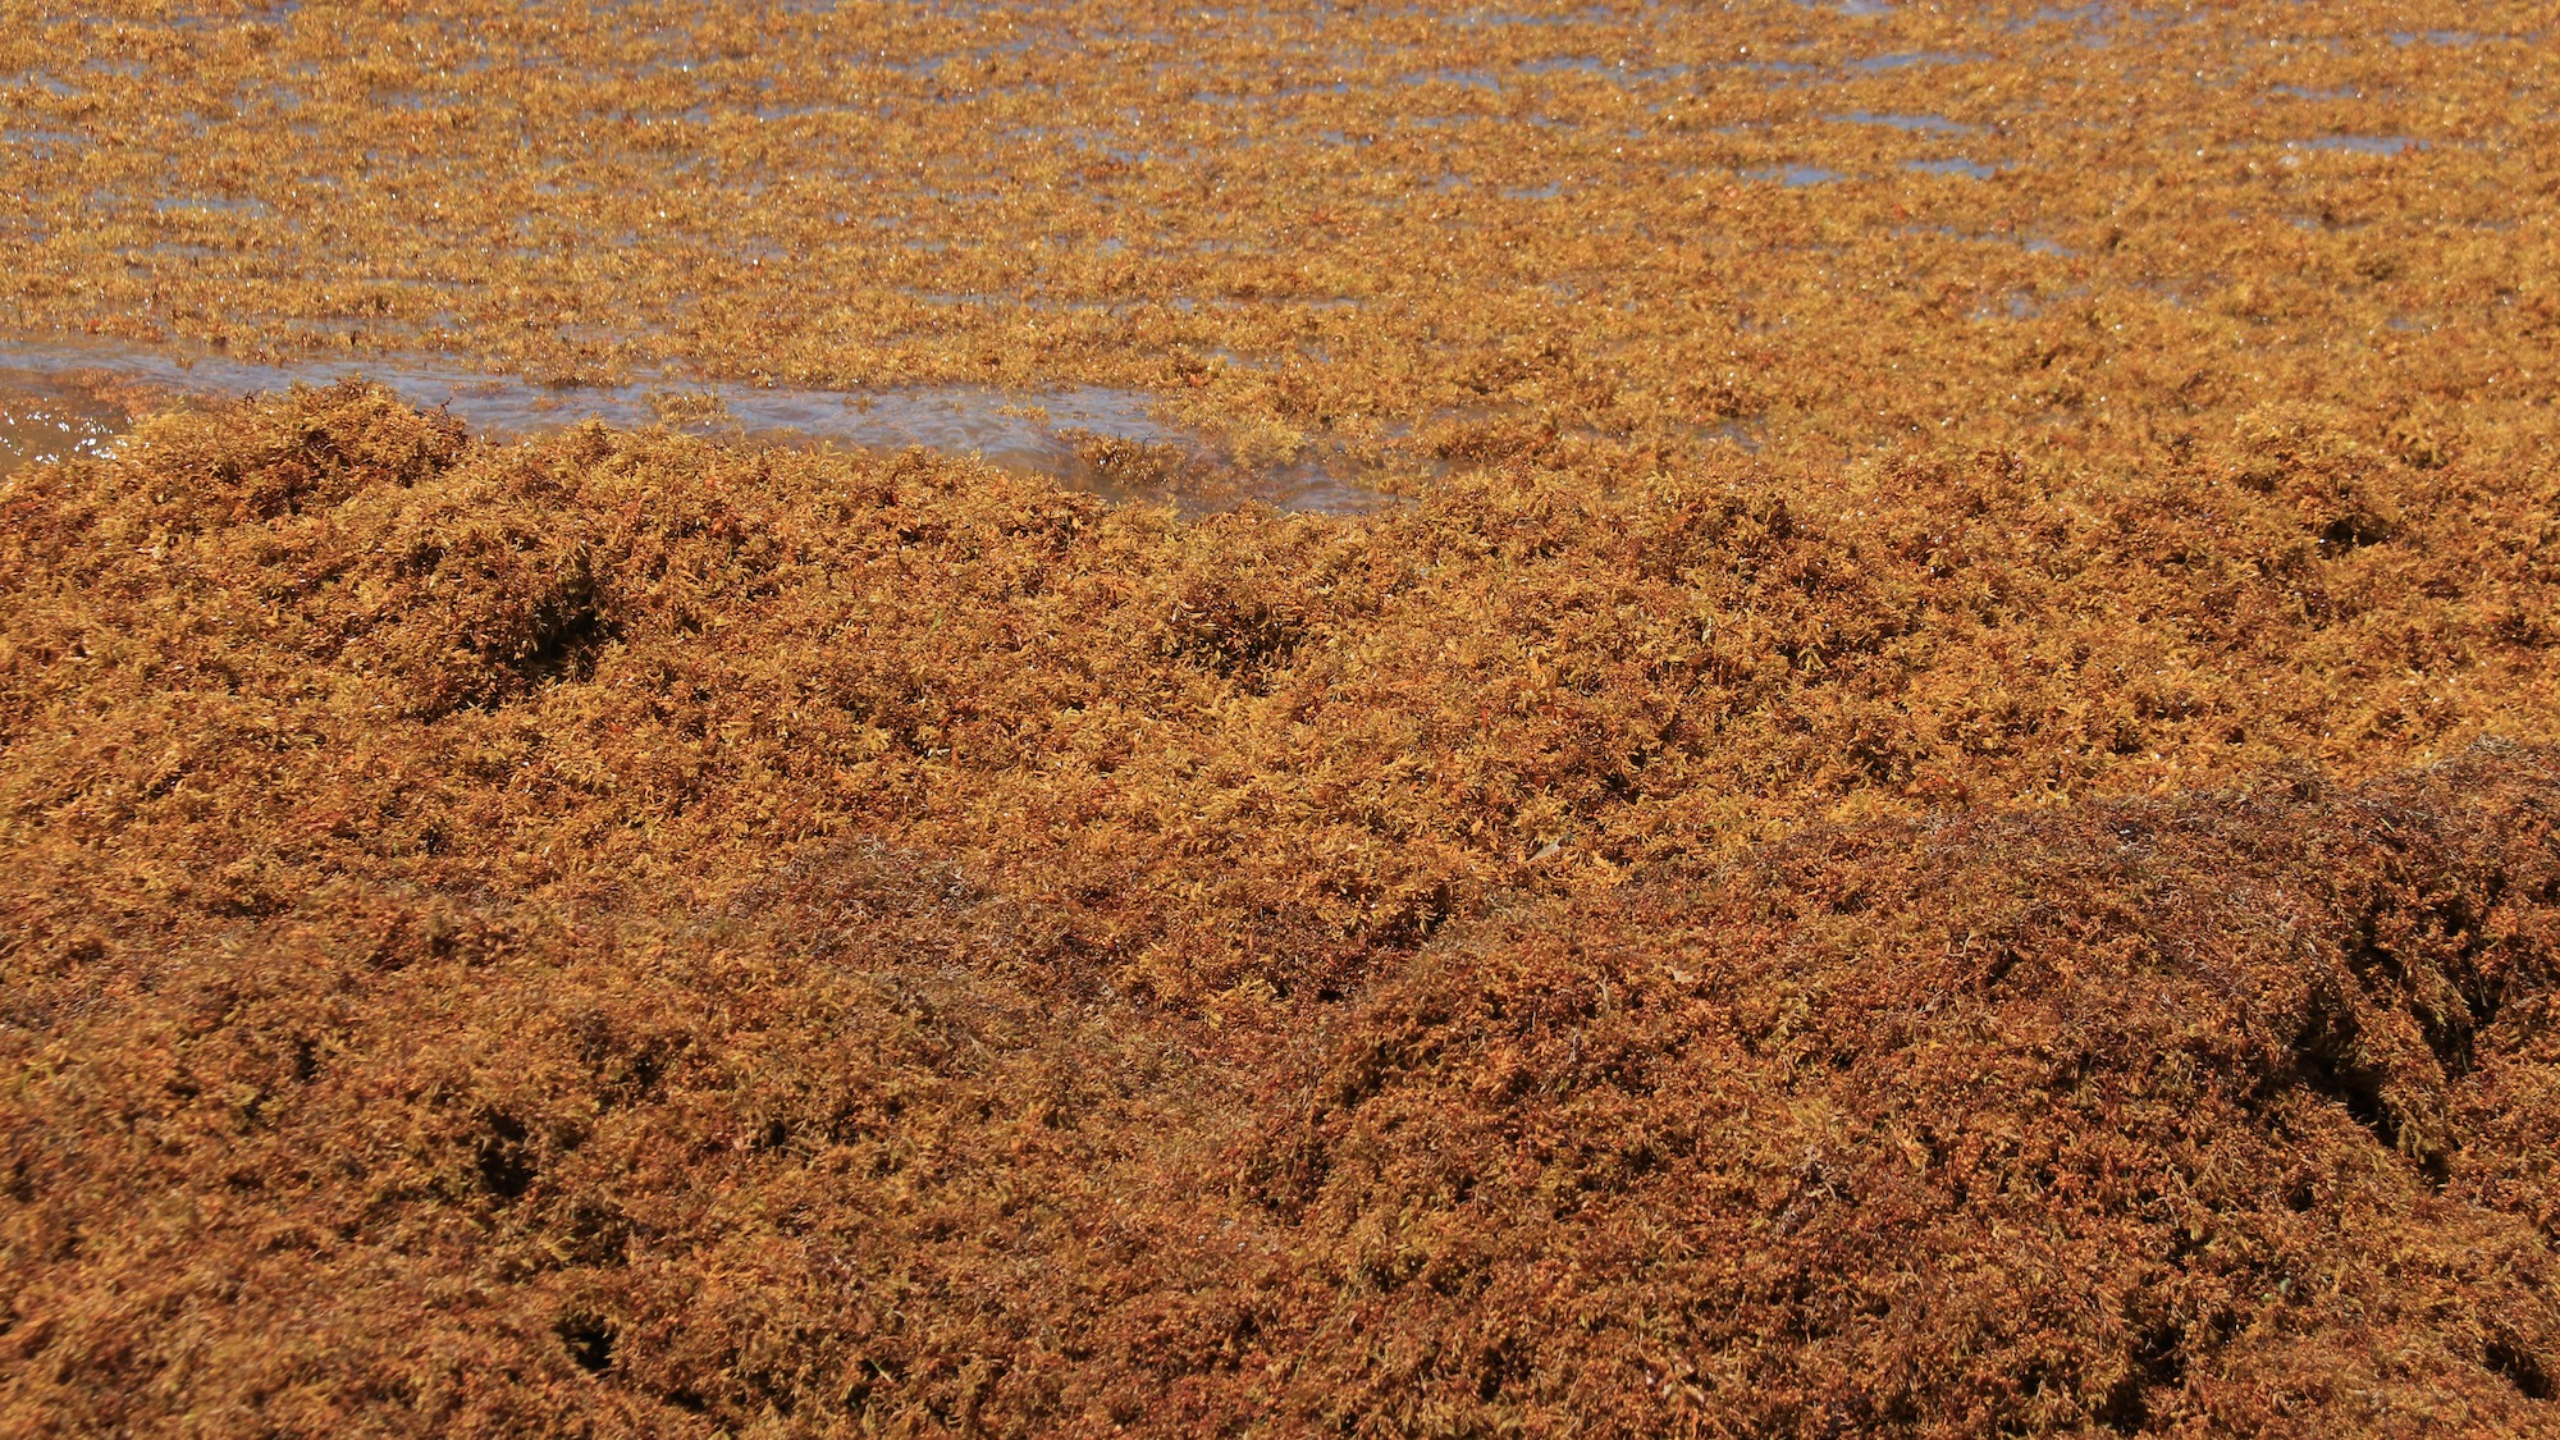 Sargassum has caused health and environmental problems in the Caribbean for years. 